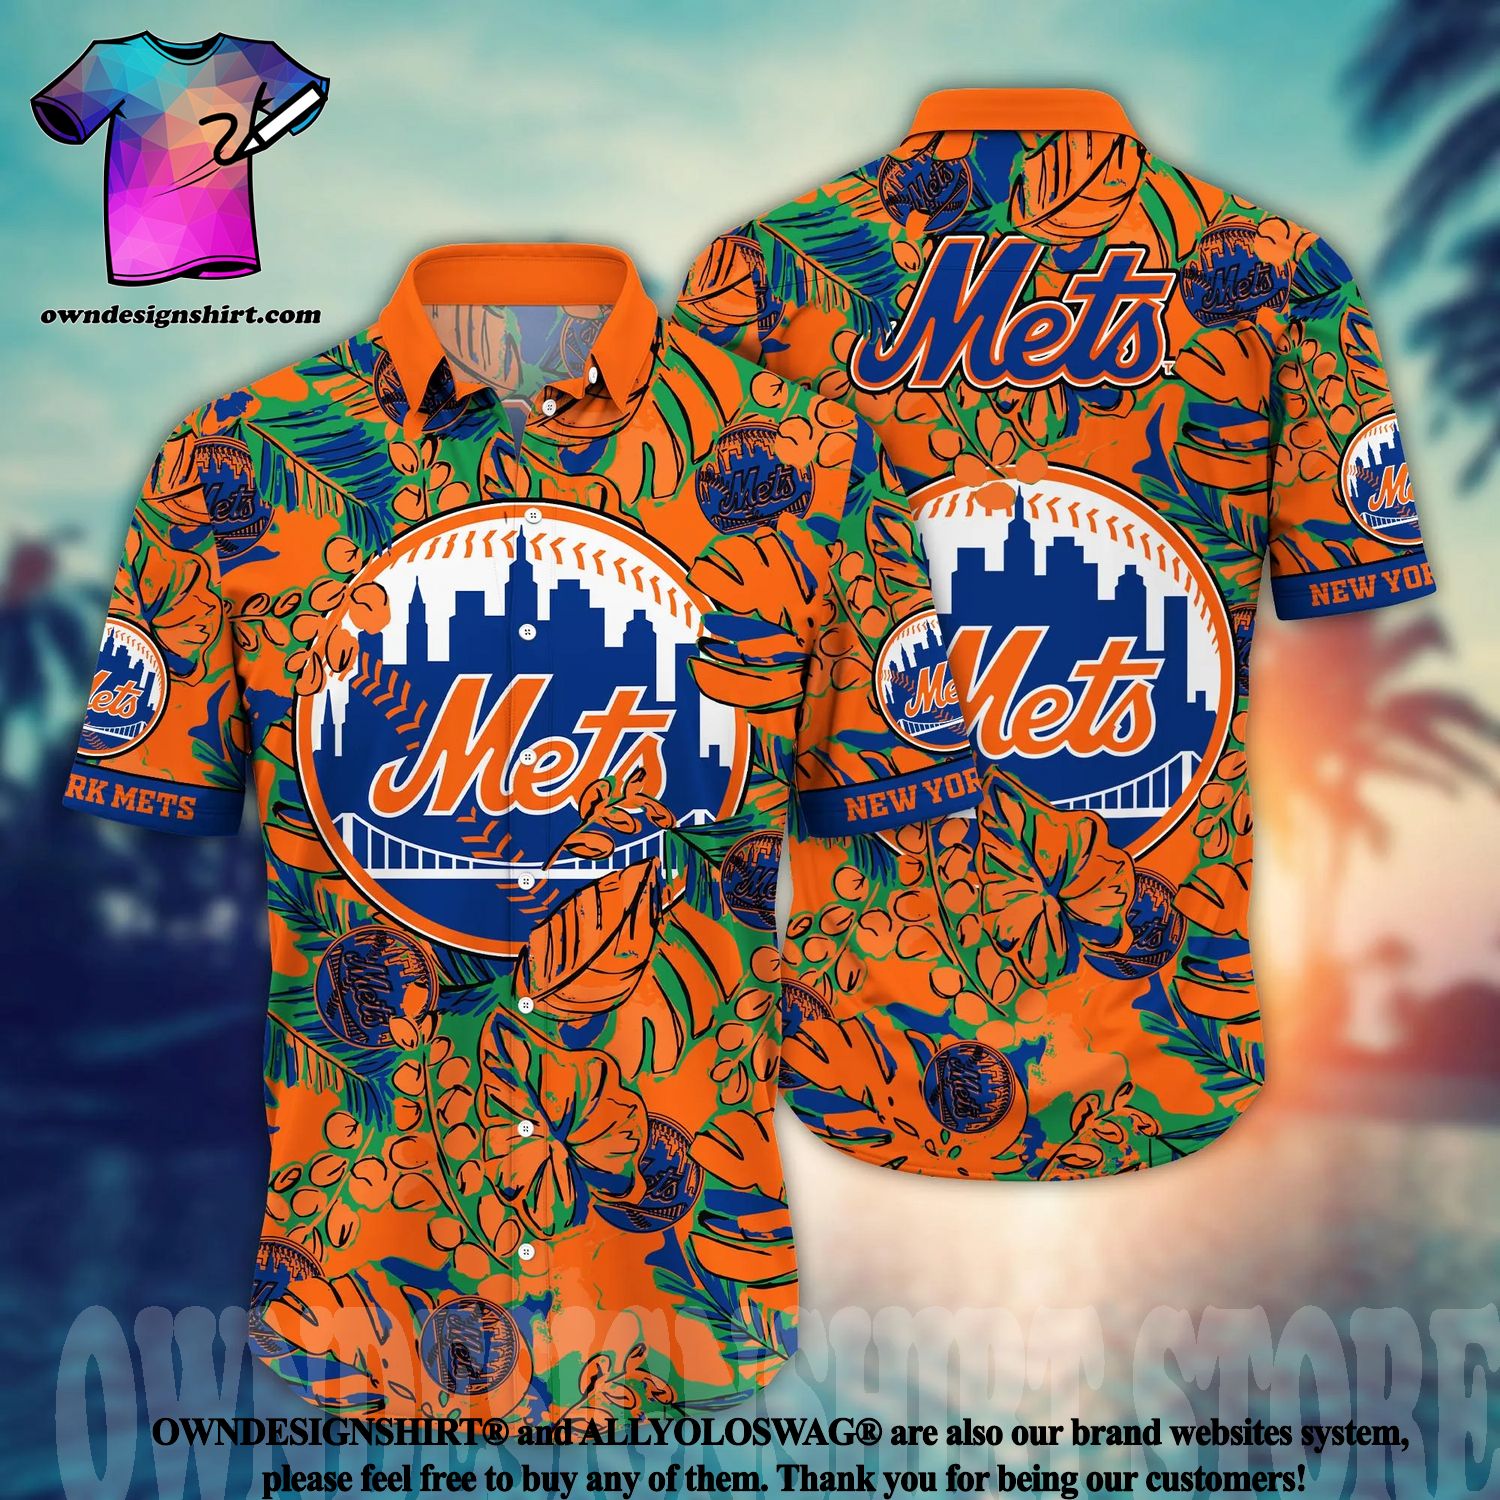 Best Dad Ever New York Mets Baseball Shirt - Bring Your Ideas